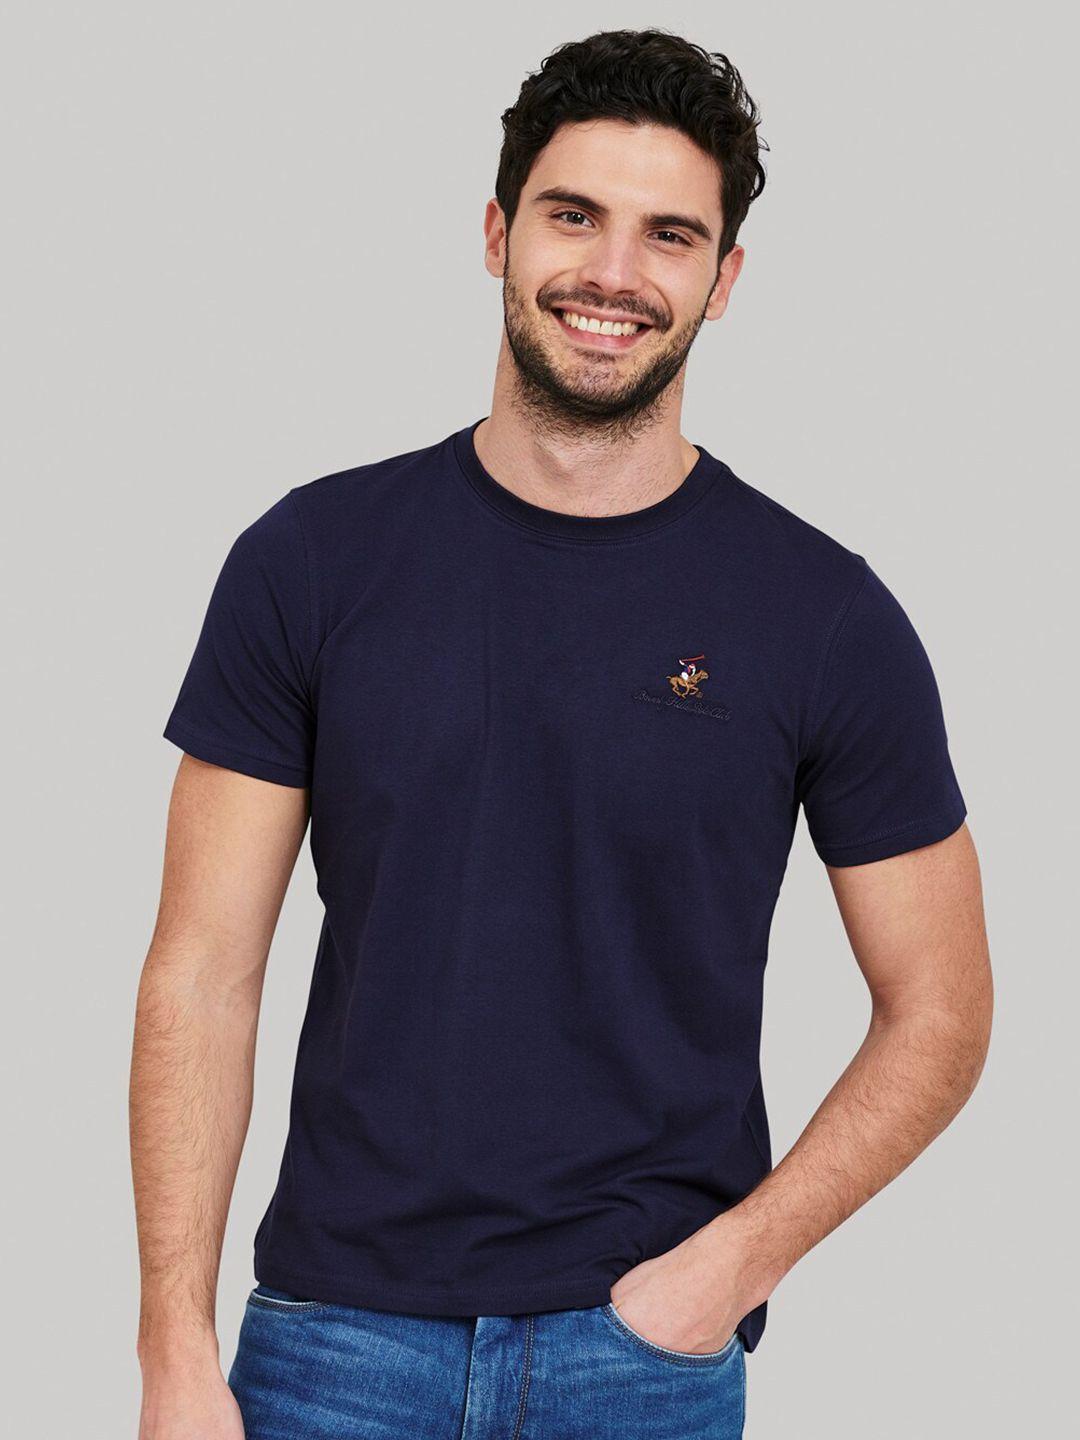 beverly-hills-polo-club-men-navy-blue-core-stretch-crew-neck-with-classic-brand-logo-icon